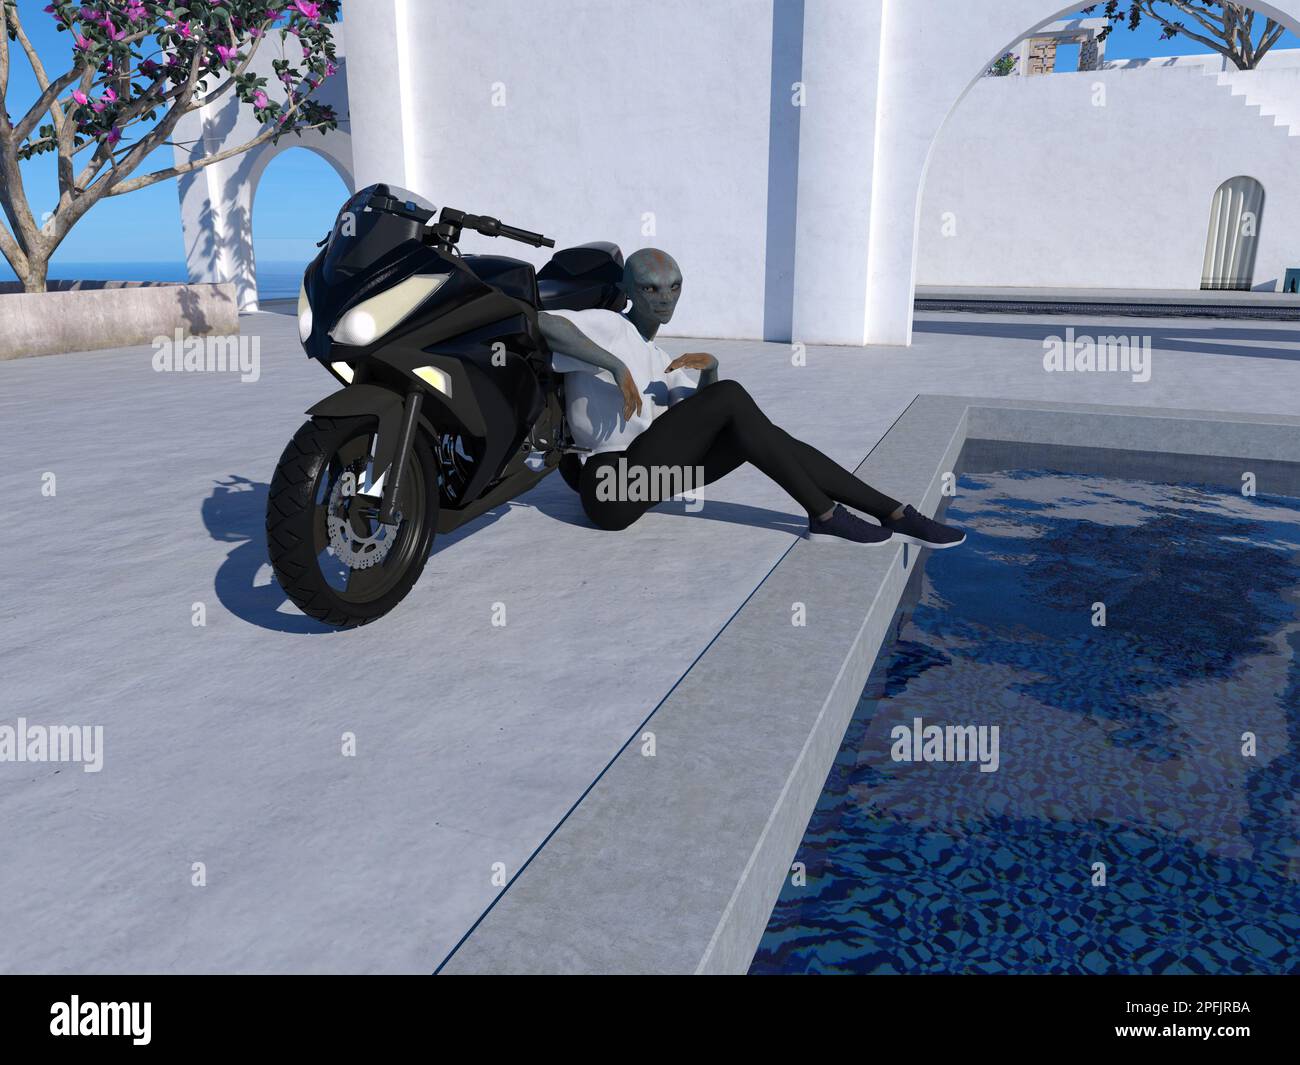 3d Illustration of an alien leaning on a motorcycle next to a pool in a relaxed position at a resort. Stock Photo